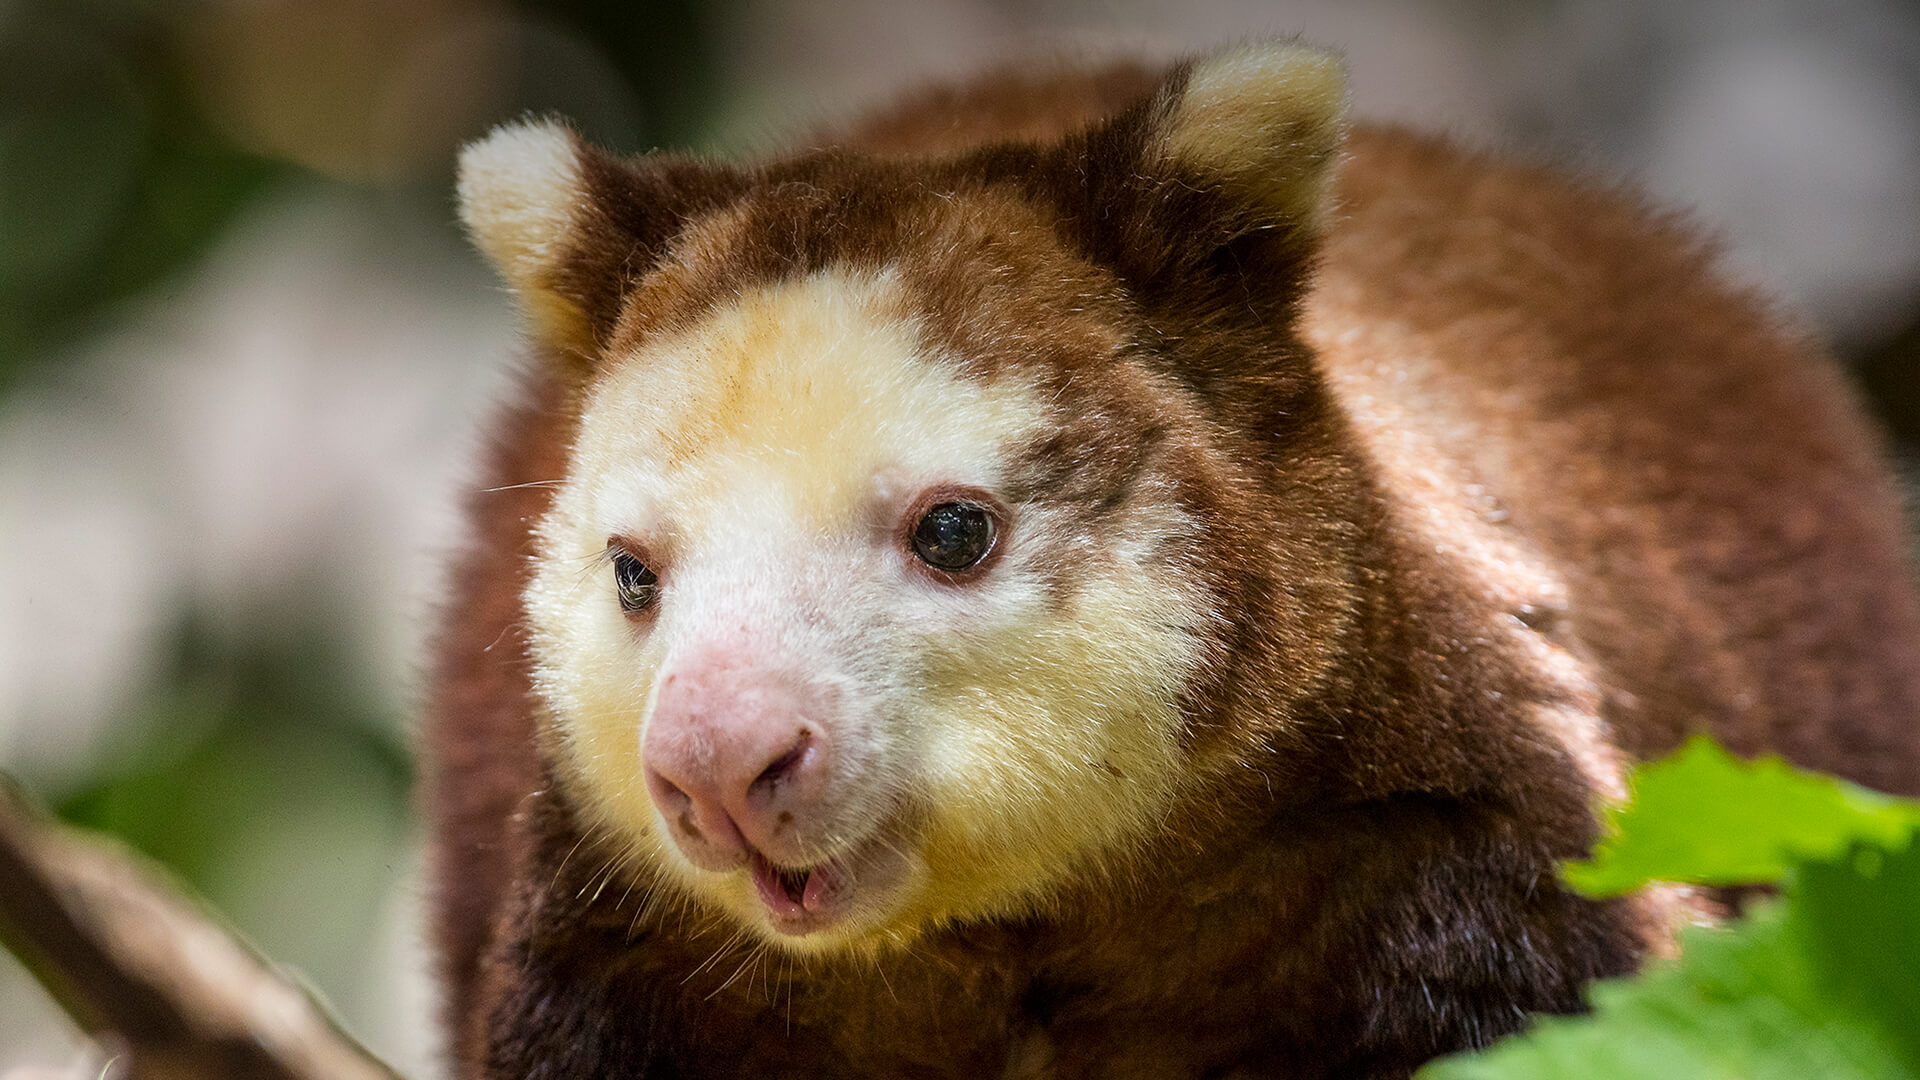 Matschie's tree kangaroo sitting on a branch, looking off to the left